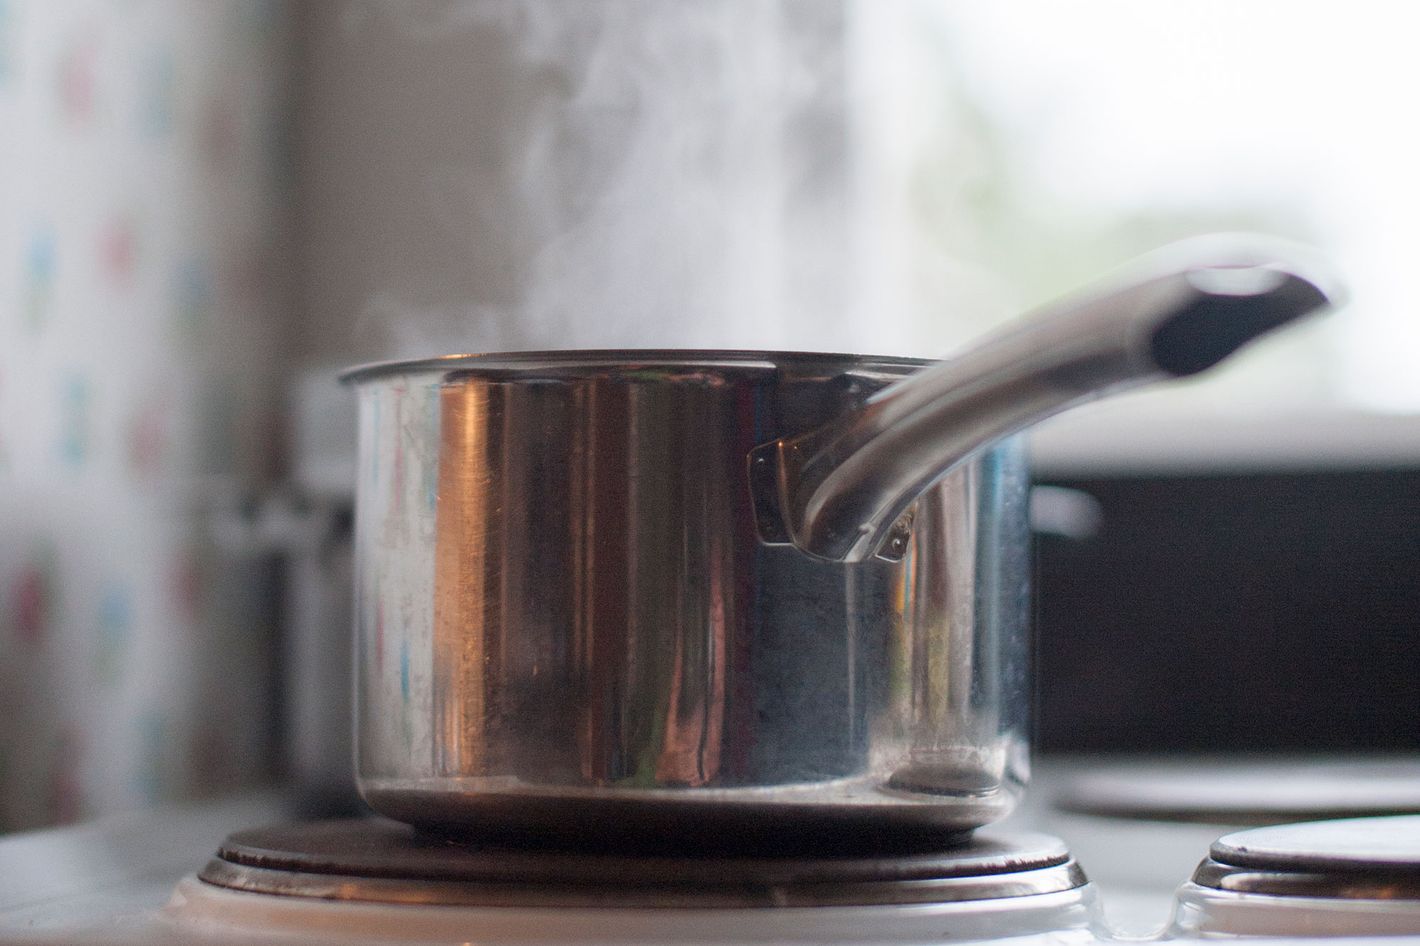 Hot Water Challenge: Why You Shouldn't Pour Boiling Water On Someone